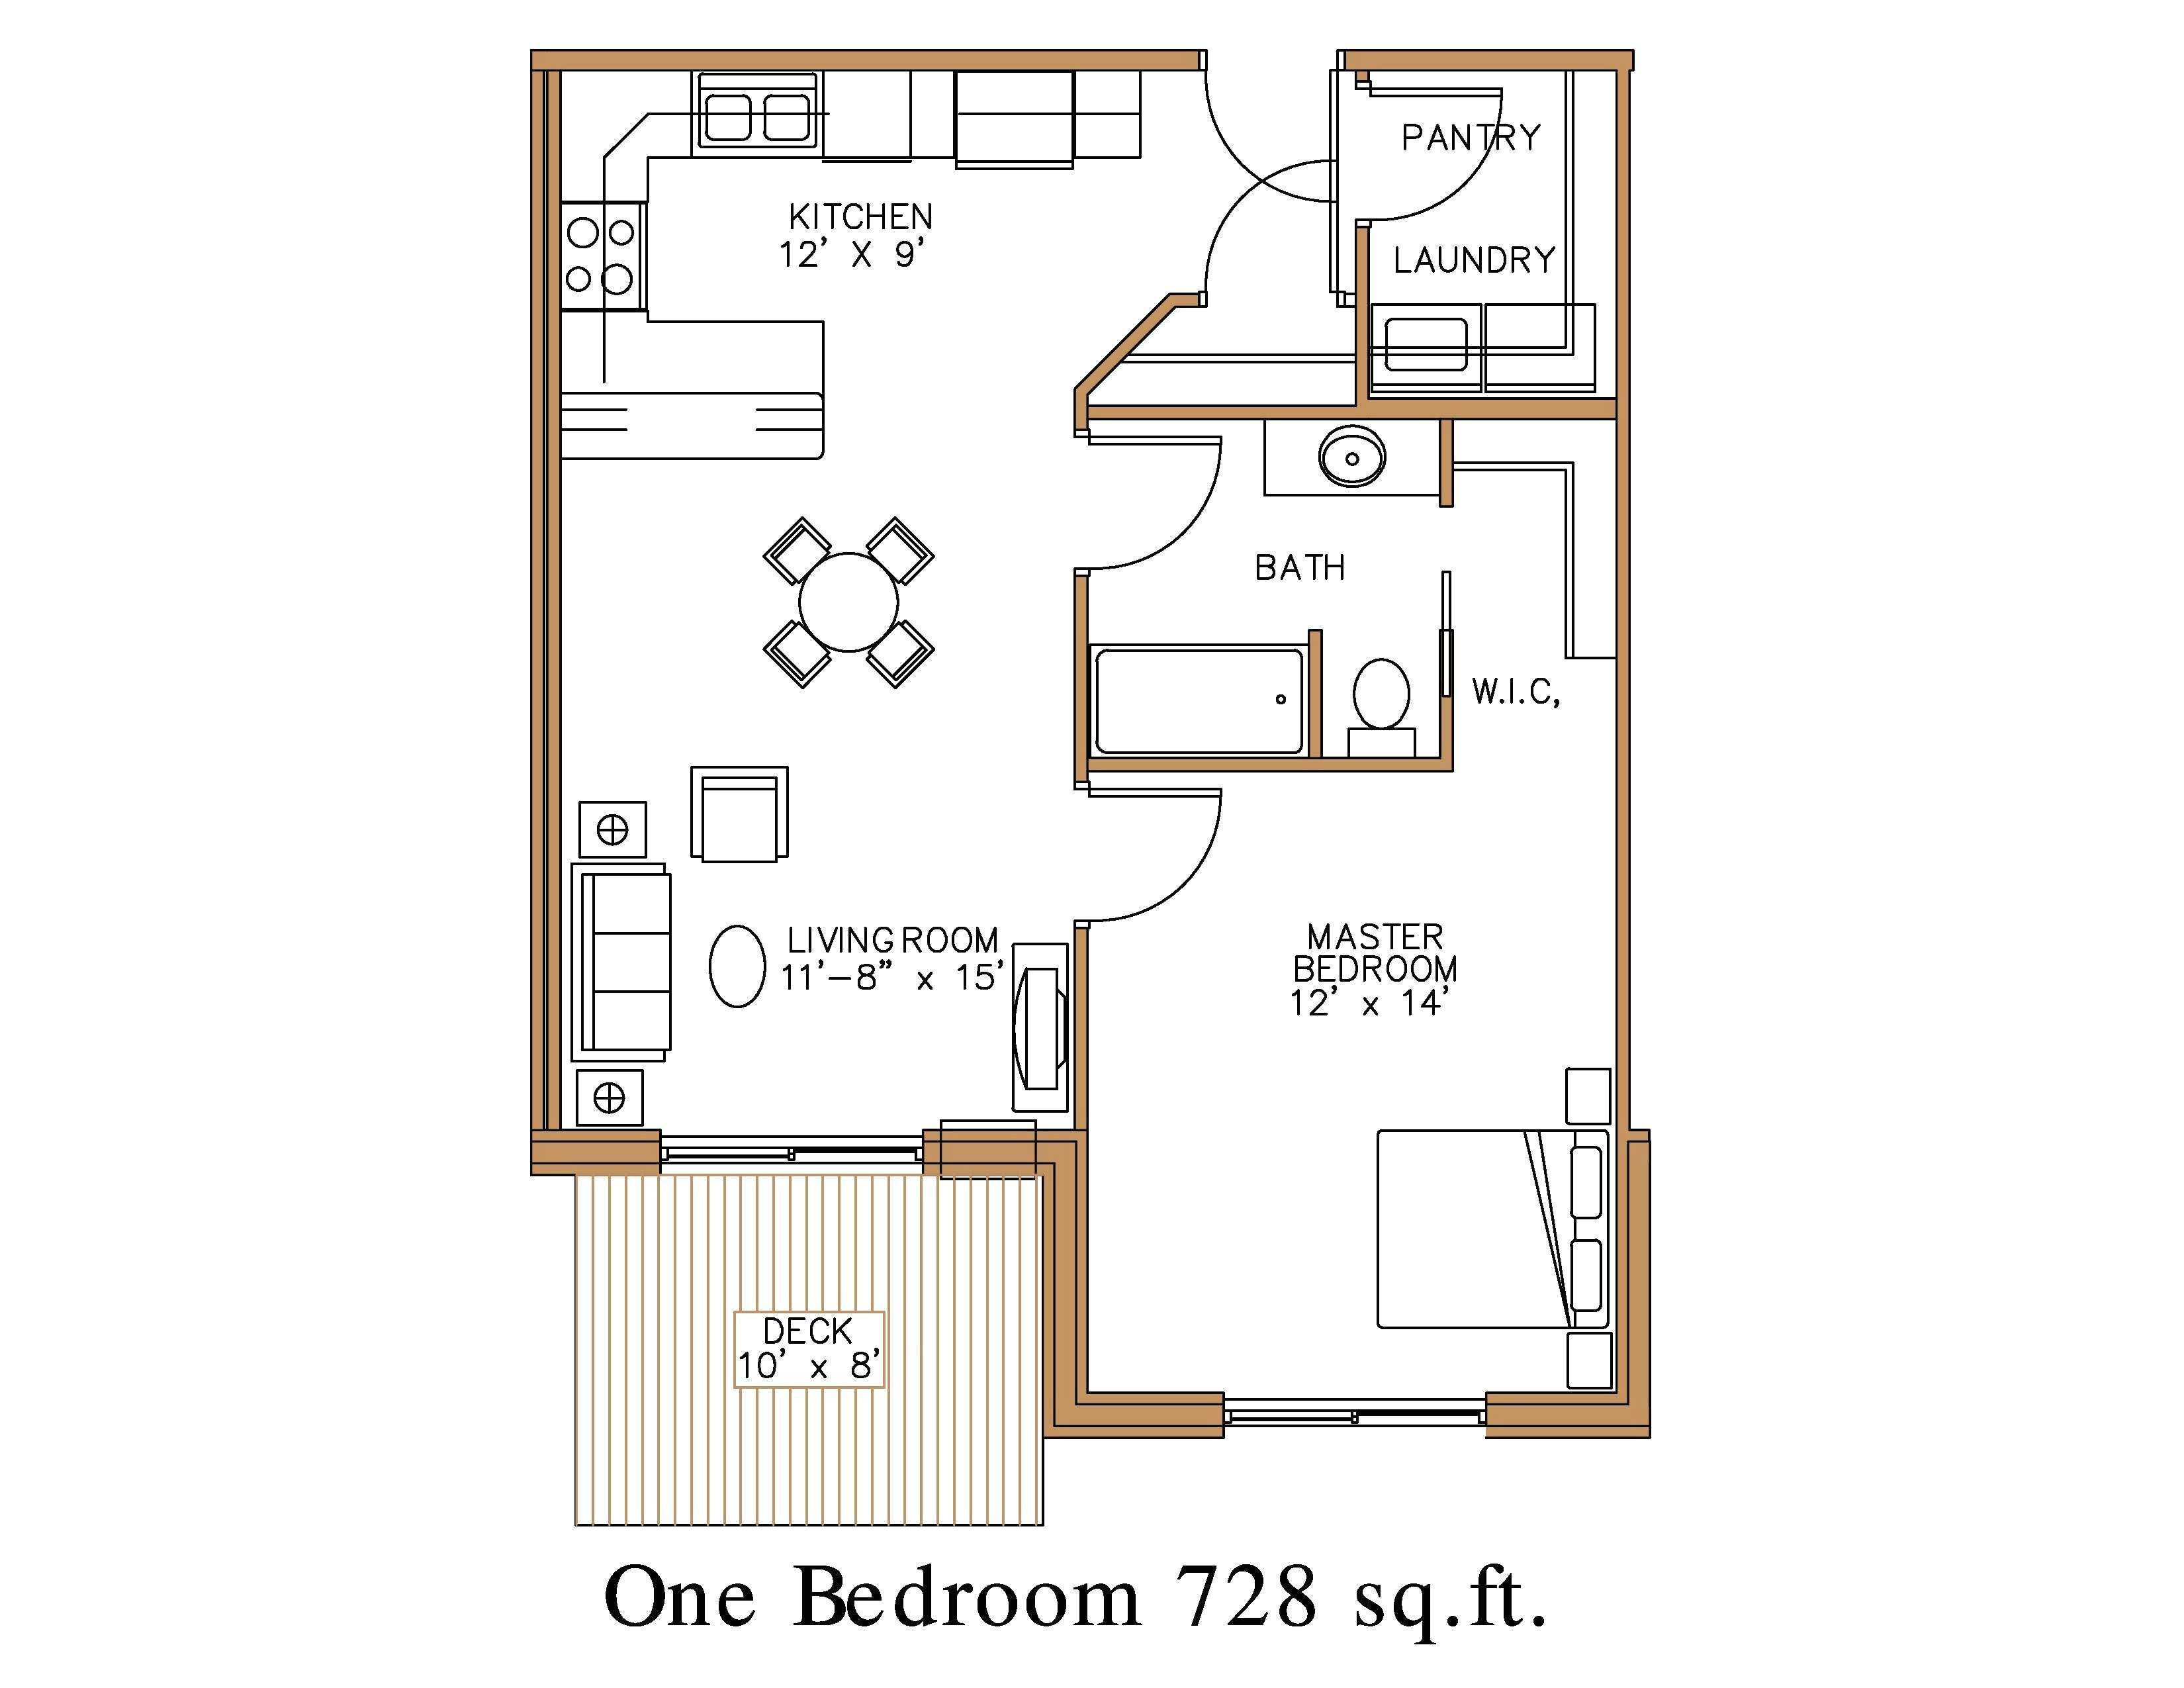 9 11 Drawing Ideas Haunted House Drawing Ideas Luxury Floor Plan Ideas Awesome Free